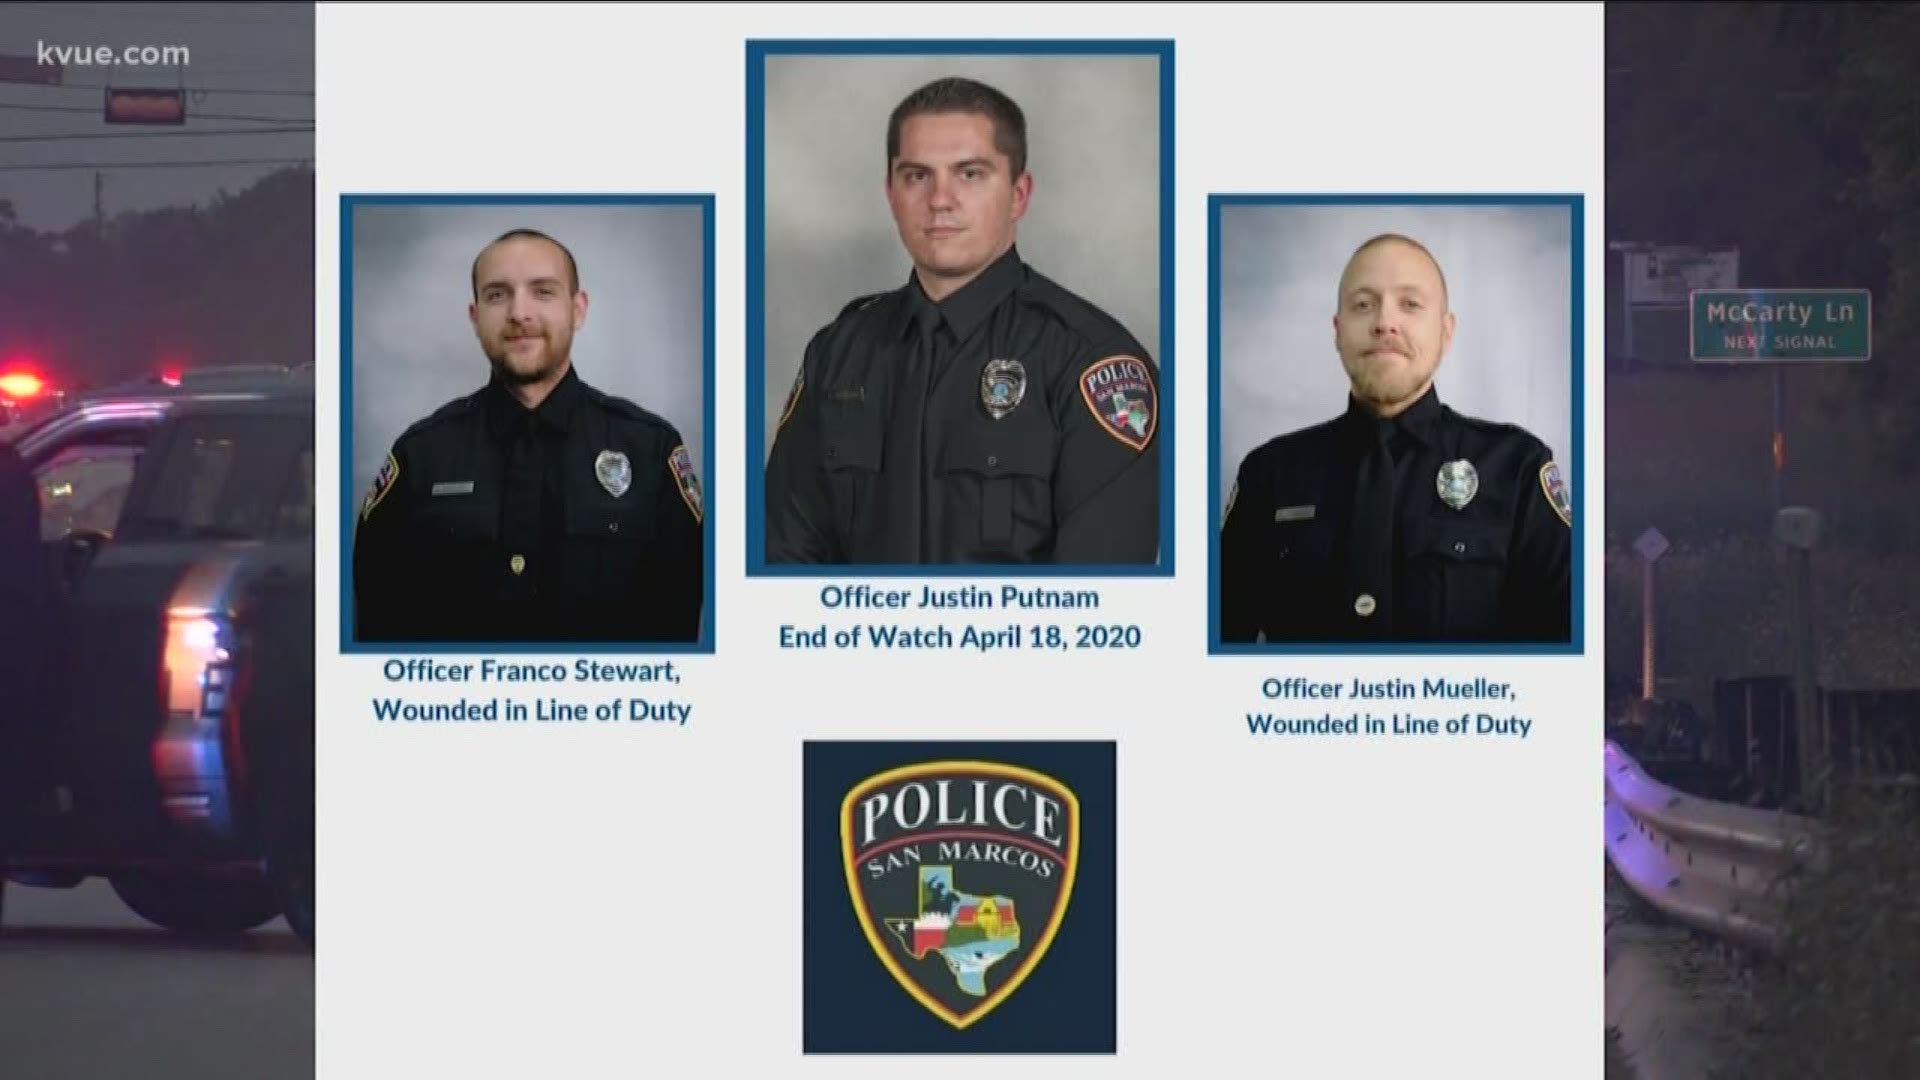 Justin Putnam was killed in the line of duty on April 18. Justin Mueller and Franco Stewart were injured responding to the same call.